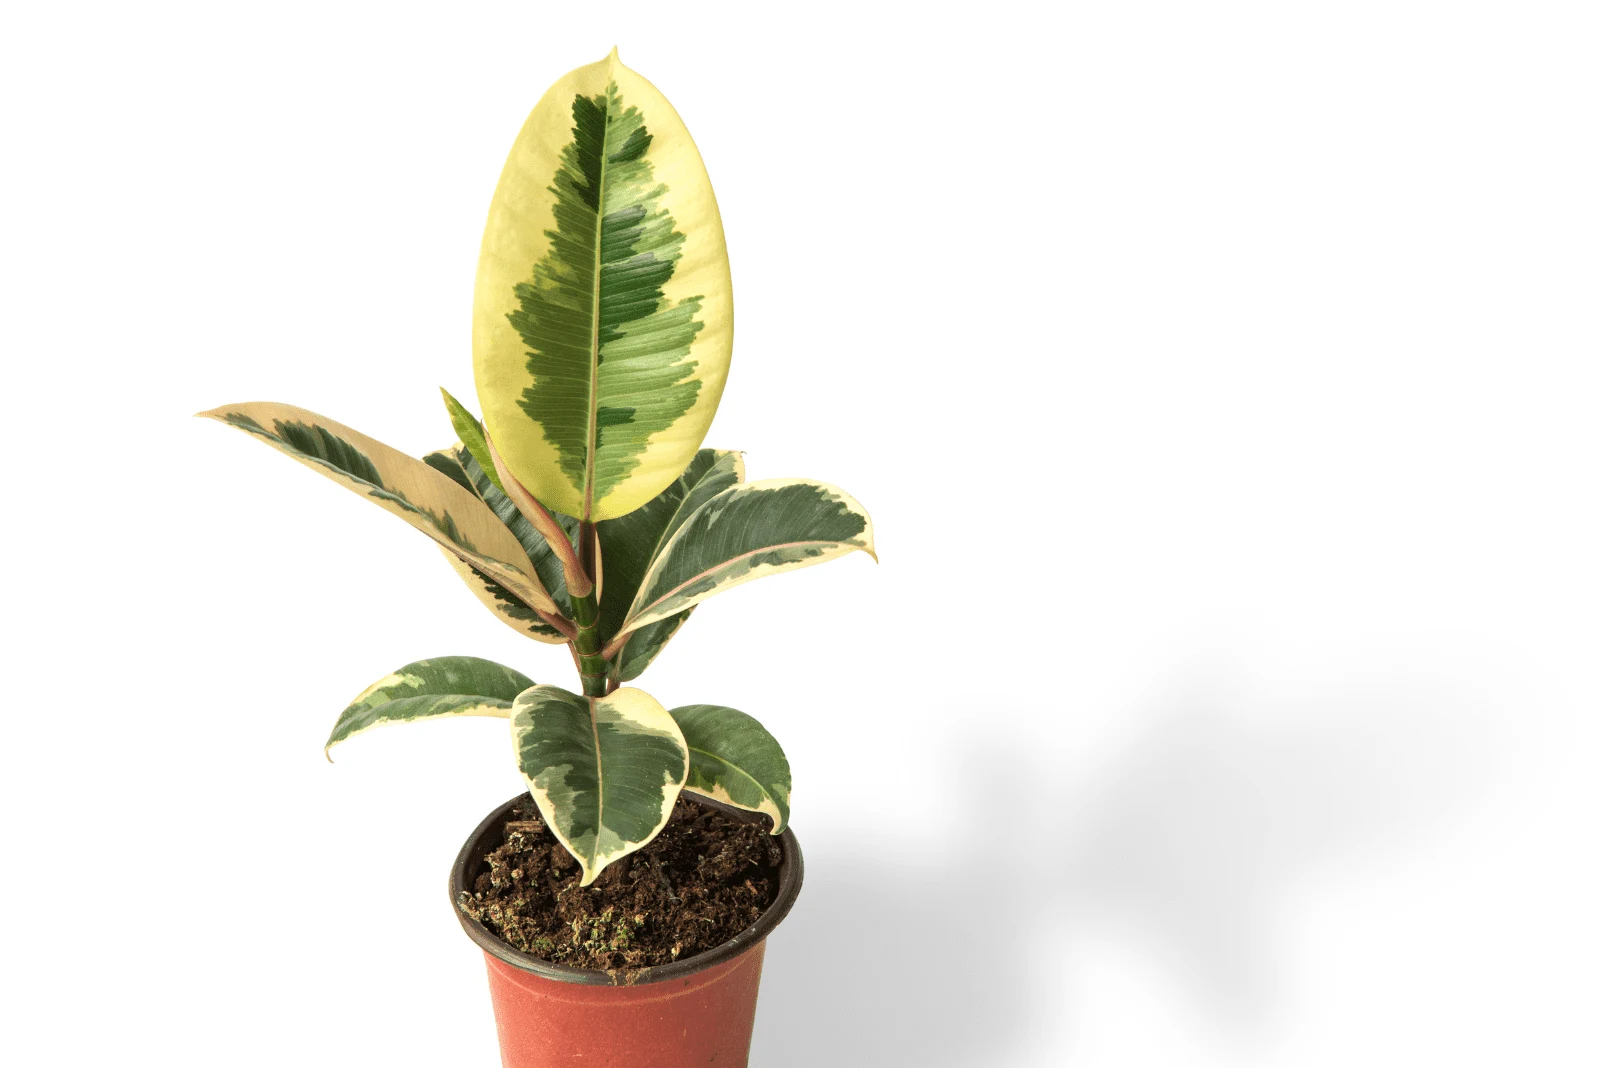 Variegated Rubber Plant in a brown pot